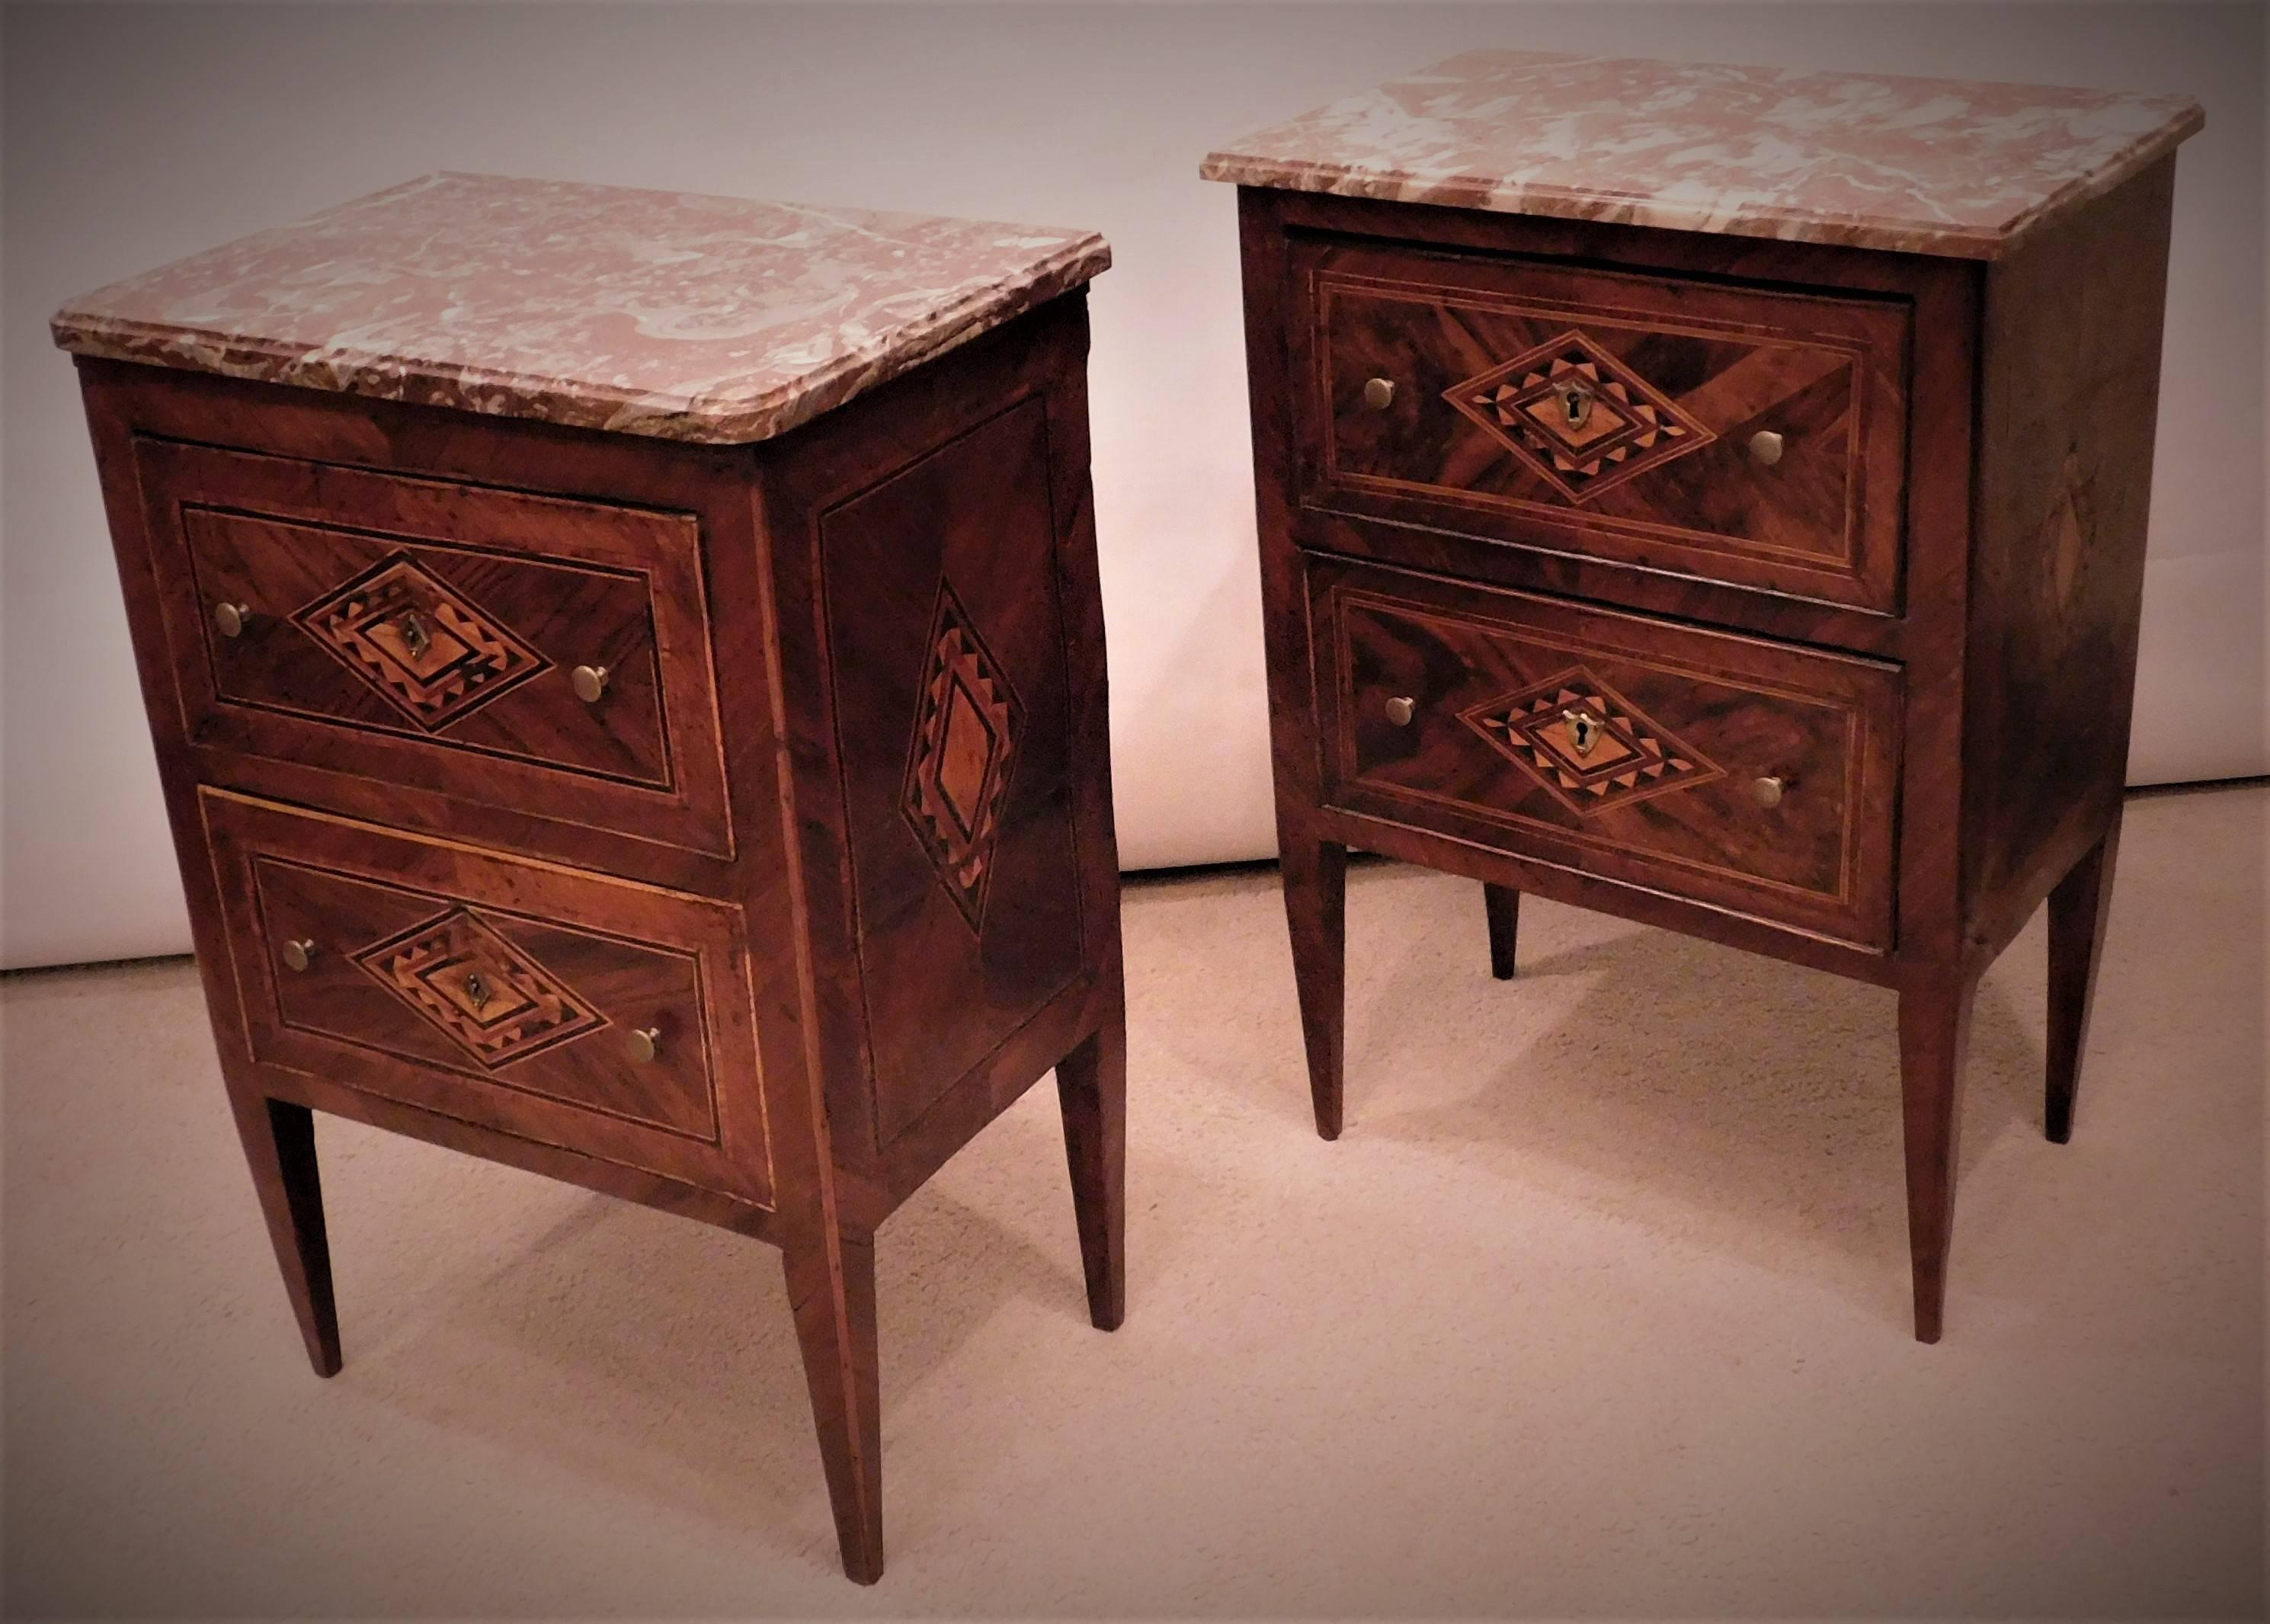 Assembled Pair of Italian Neoclassical Marble-Top Small Commodes, circa 1810 For Sale 1